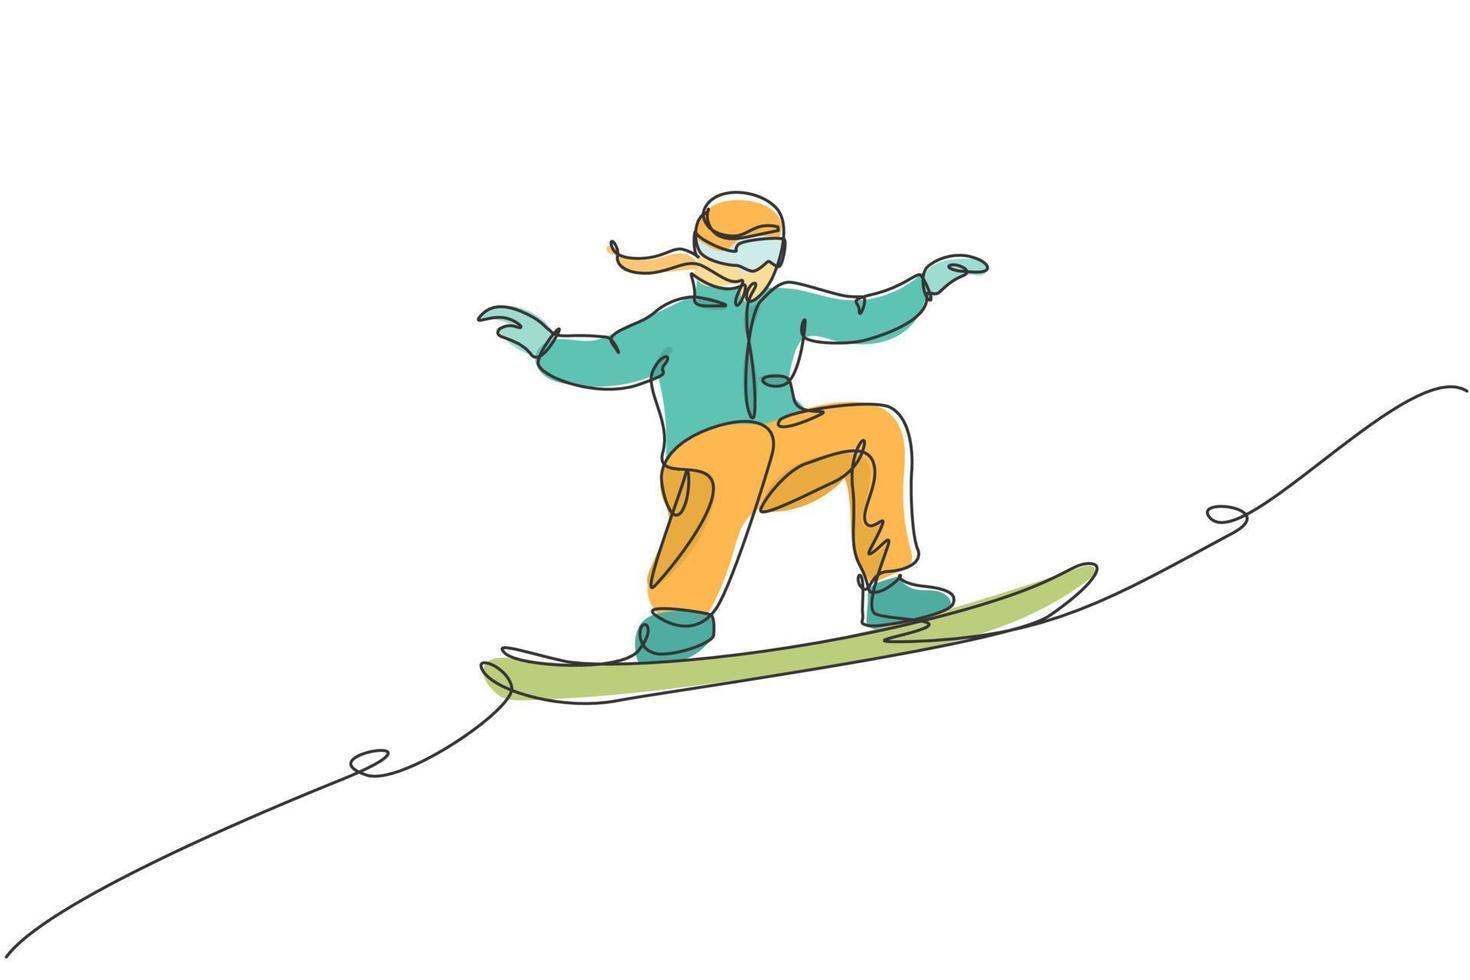 One single line drawing of young energetic snowboarder woman ride fast snowboard at snowy mountain vector illustration. Tourist vacation lifestyle sport concept. Modern continuous line draw design